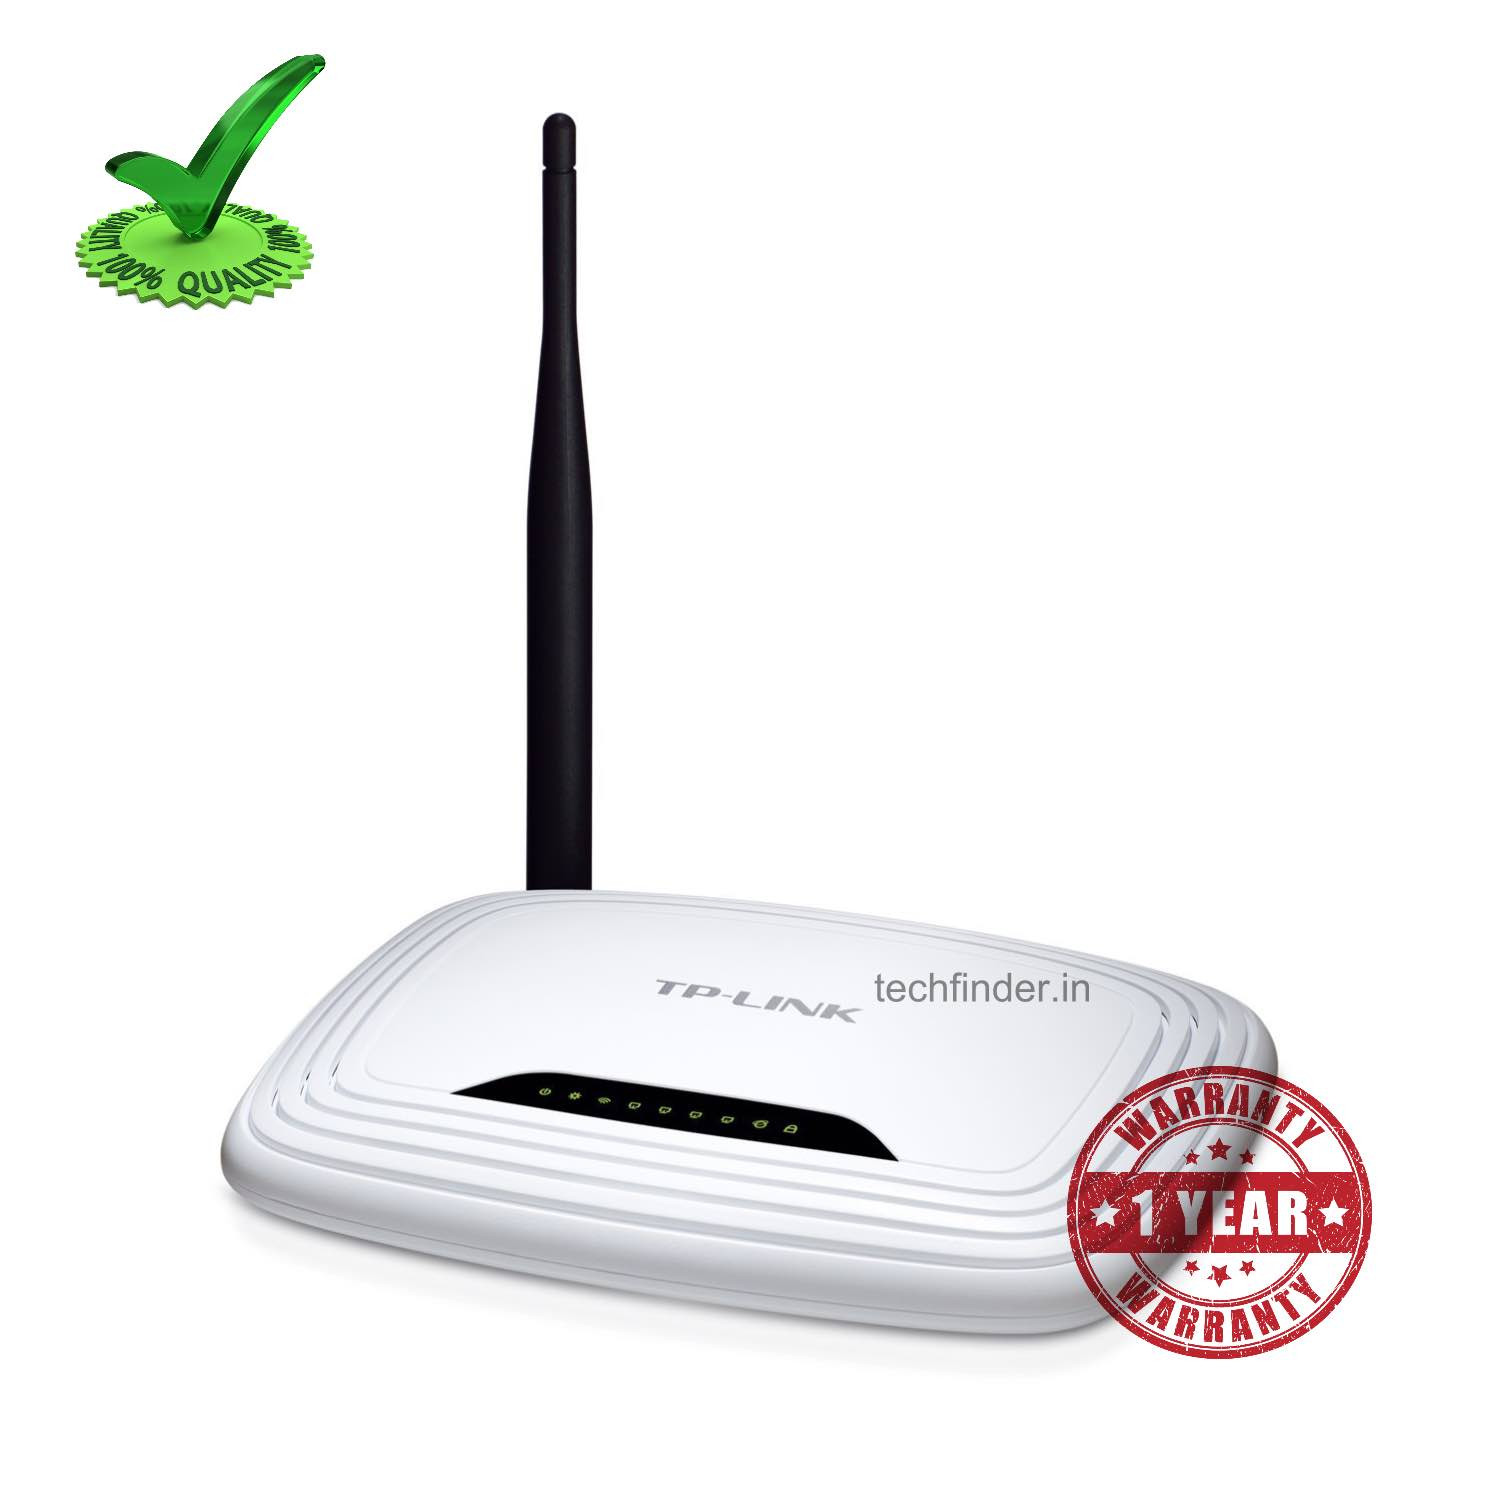 TP-Link TL-WR740N 150mbps Wireless Router